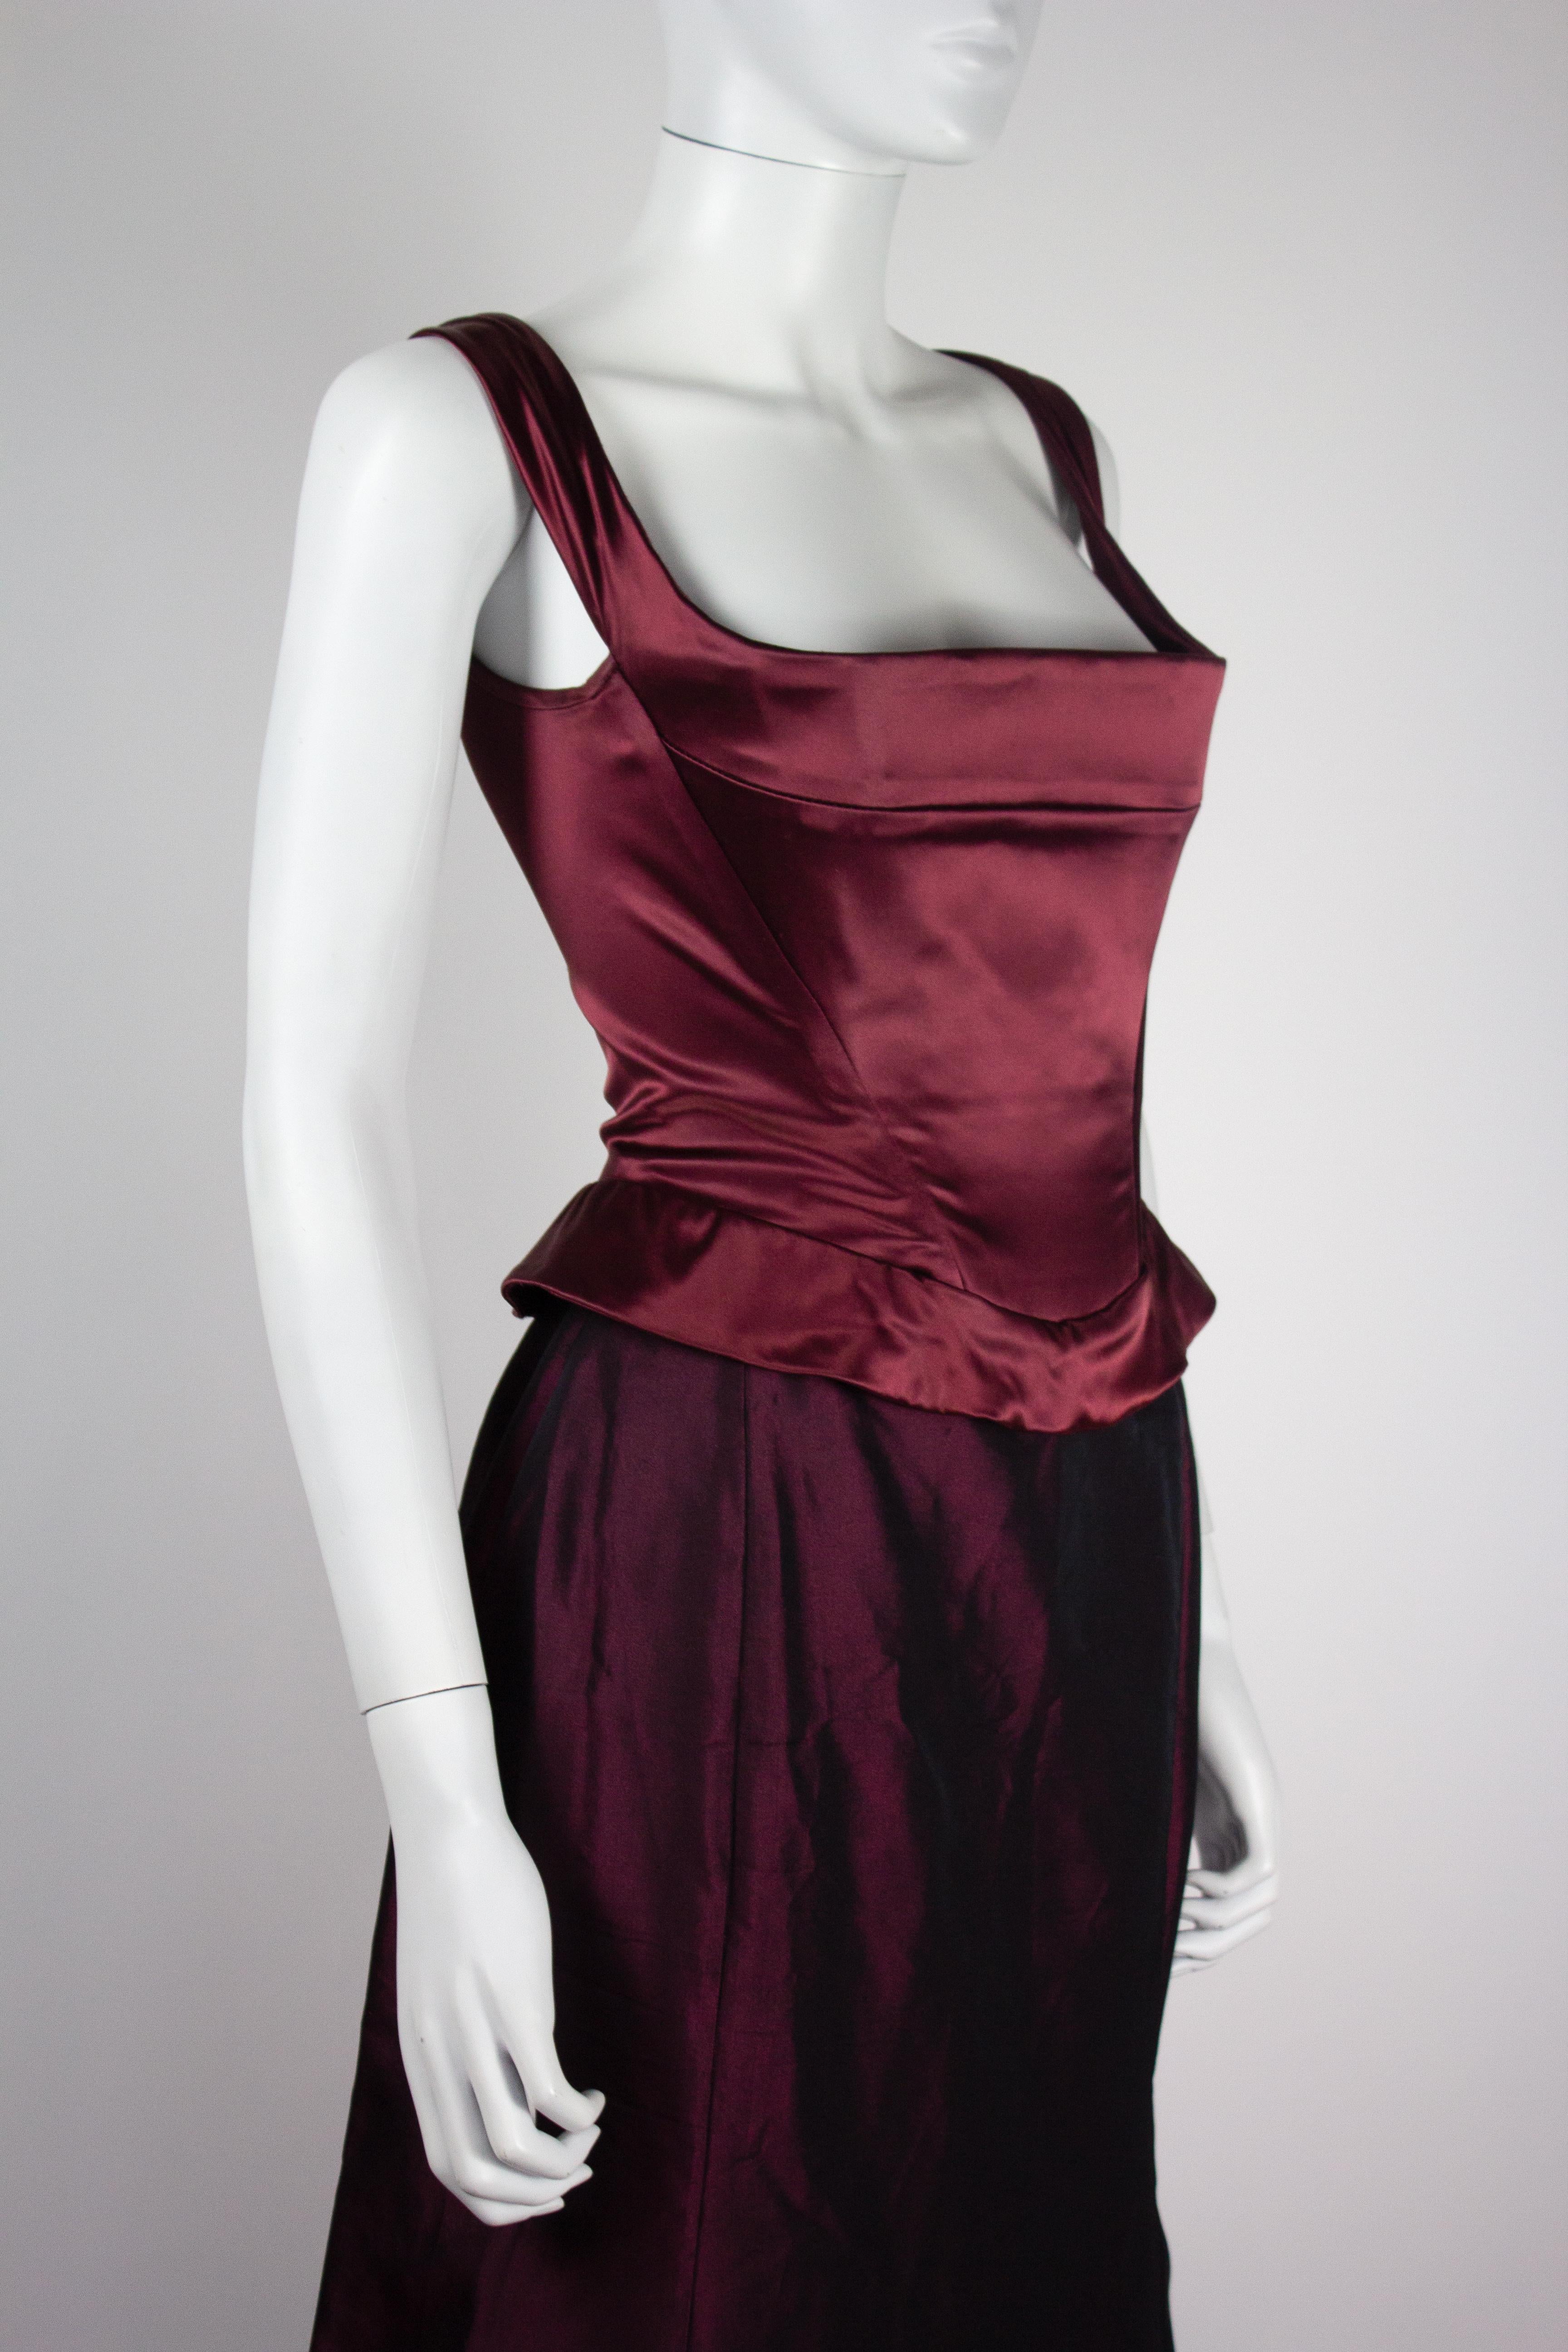 Vivienne Westwood corset and skirt ensemble from the Fall/Winter 1996 collection. The colour is an iridescent wine burgundy/dark purple in silk. 

Condition
Very good overall. The corset has no major flaws, some tarnishing to the zip. The exterior